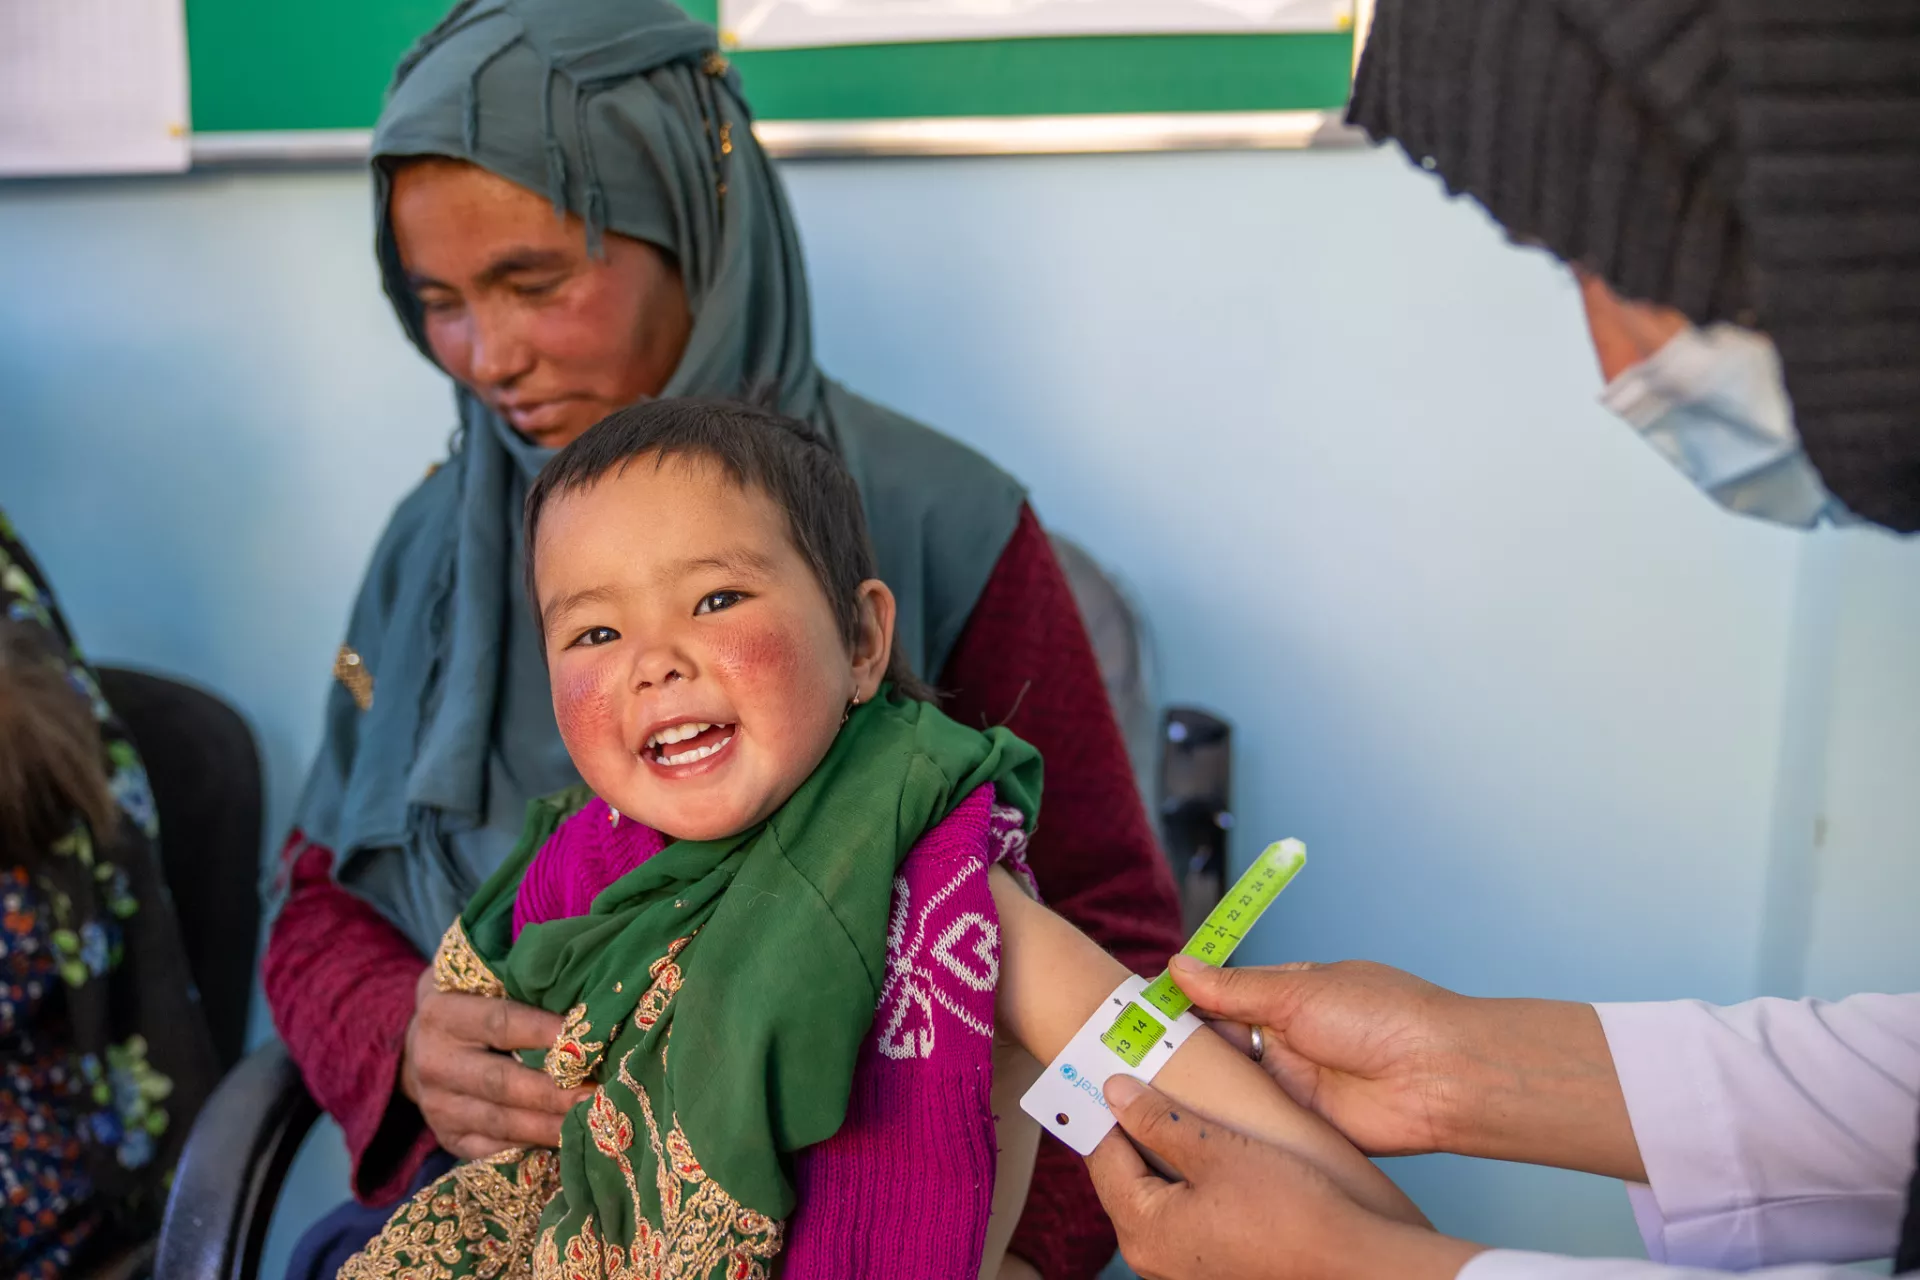 A 3-year-old has her mid-upper arm circumference measured to screen her for signs of malnutrition in Afghanistan